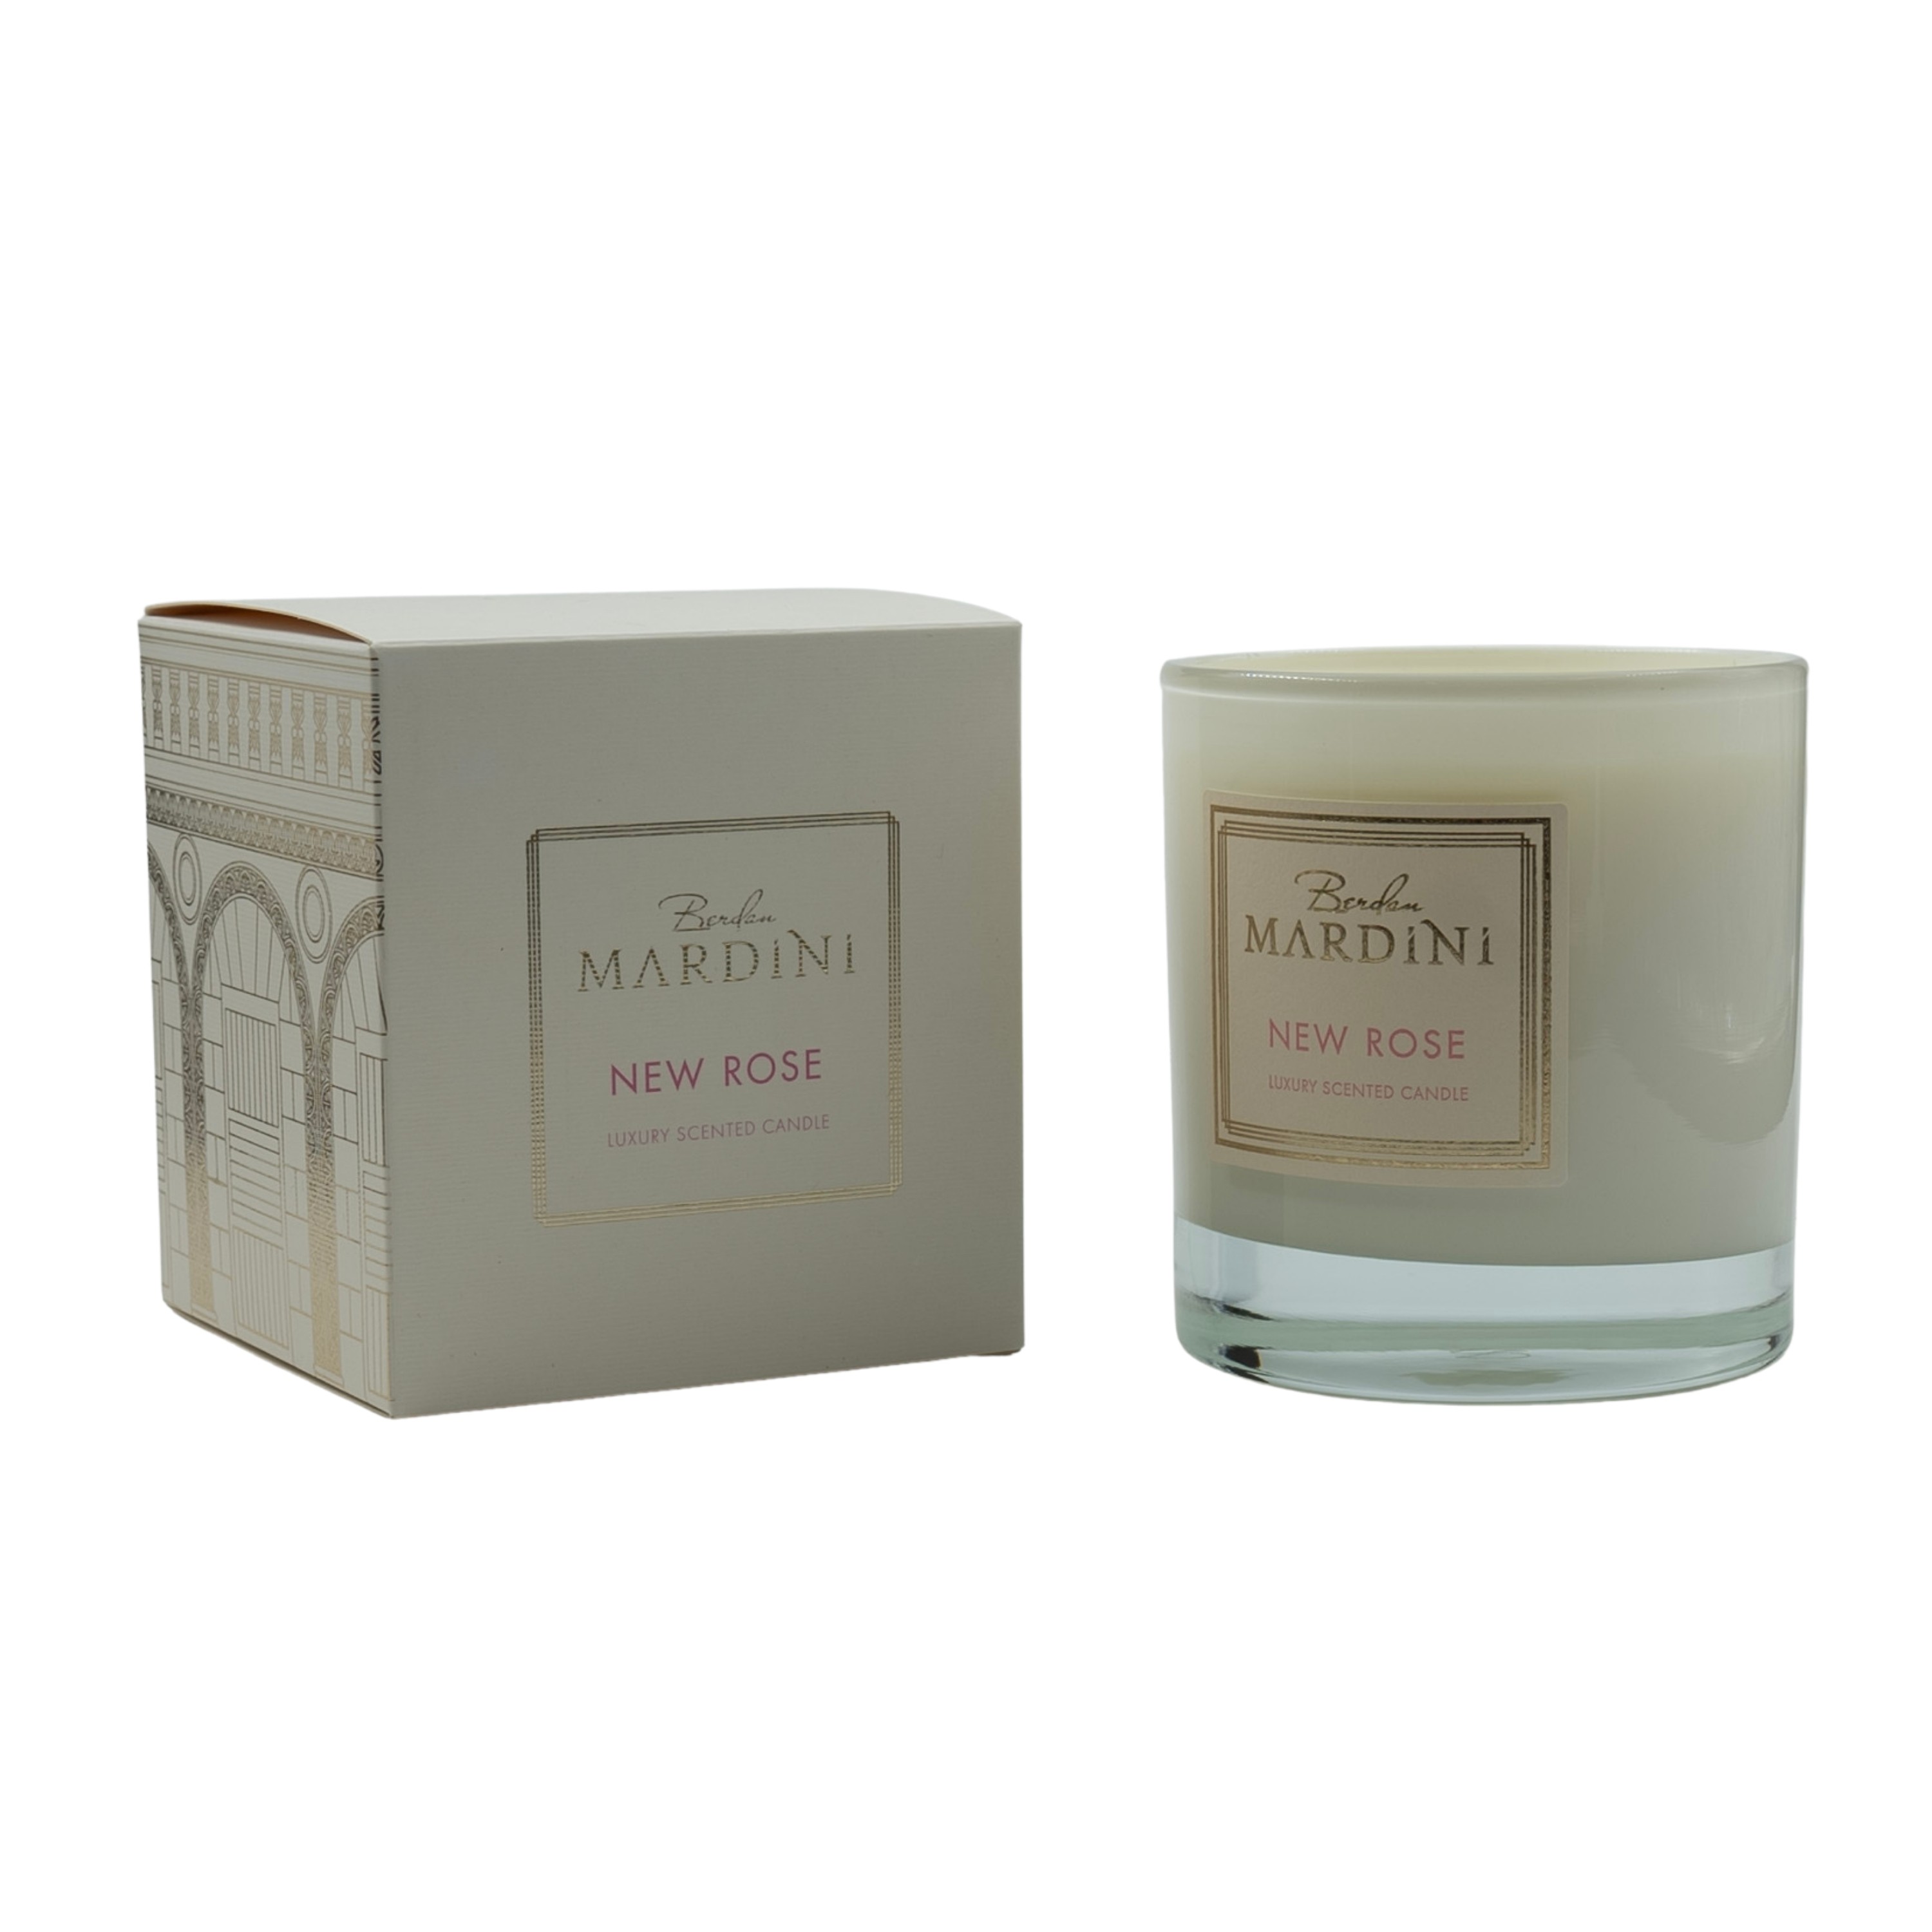 NEW ROSE LUXURY SCENTED CANDLE